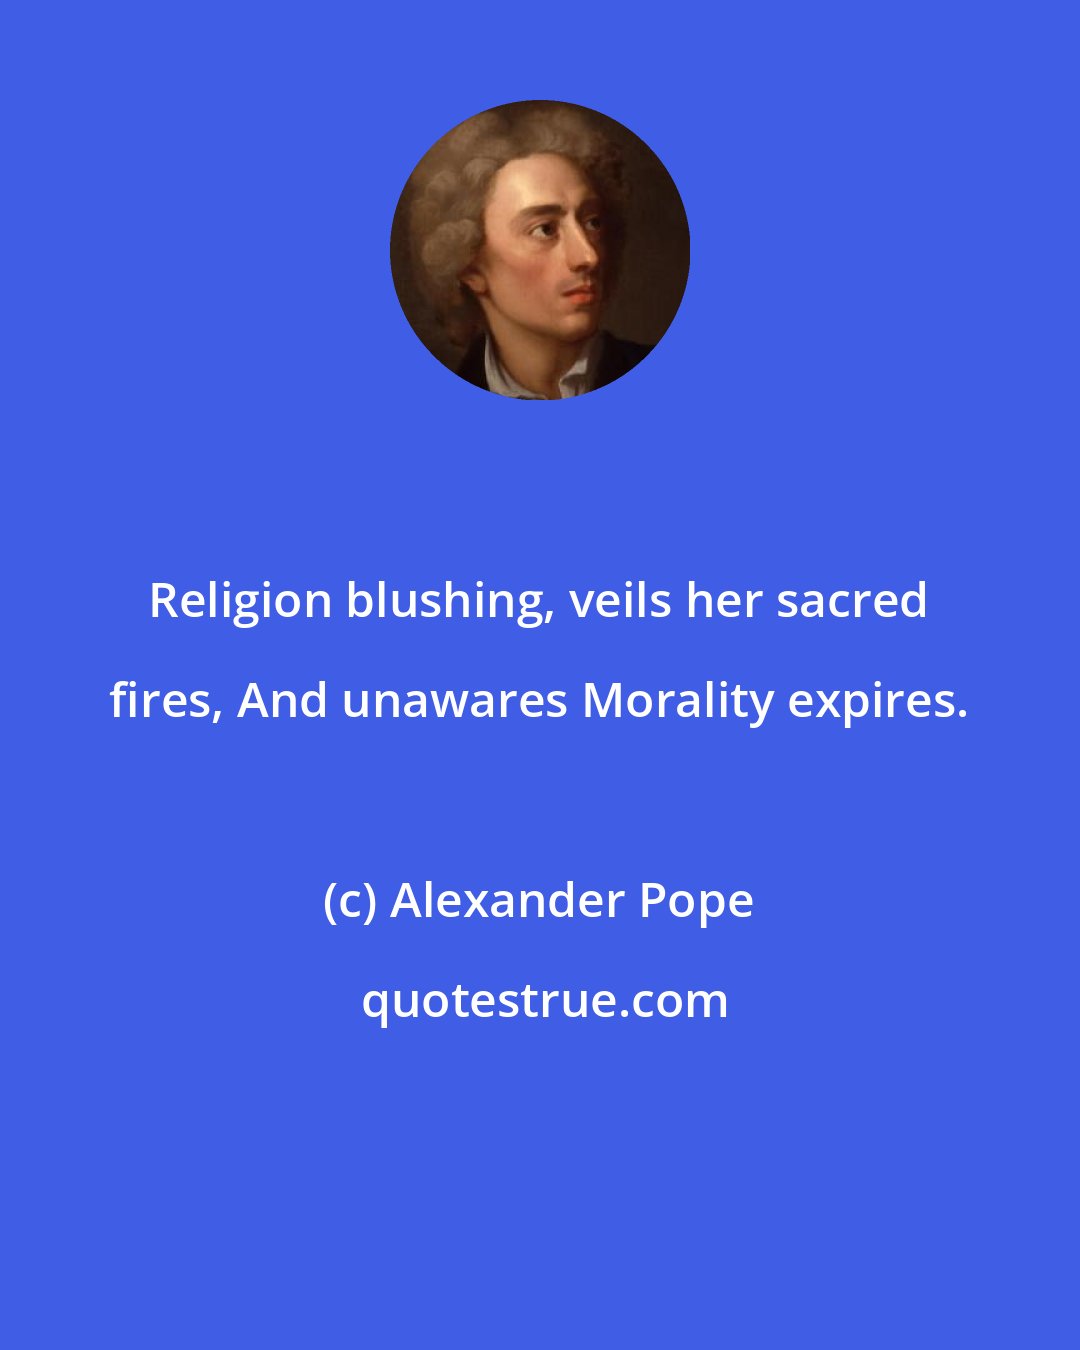 Alexander Pope: Religion blushing, veils her sacred fires, And unawares Morality expires.